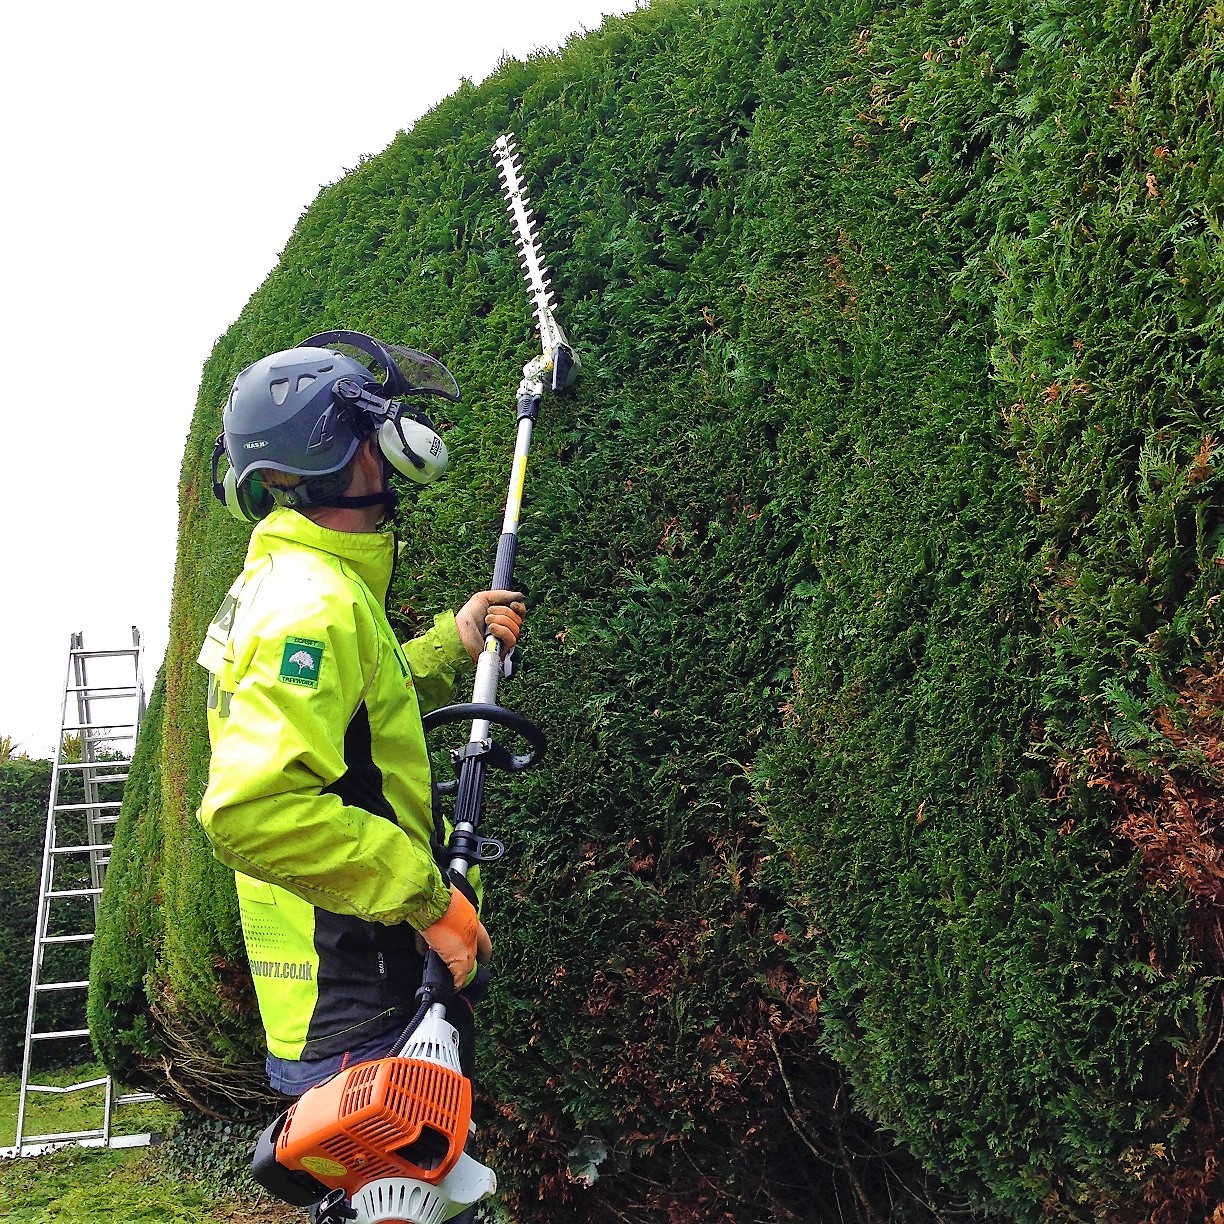 Hedge Trimming Weymouth, Dorchester, Portland in Dorset for private and commercial customers - hedge maintenance, hedge removal, hedge planting, hedge stump grinding services